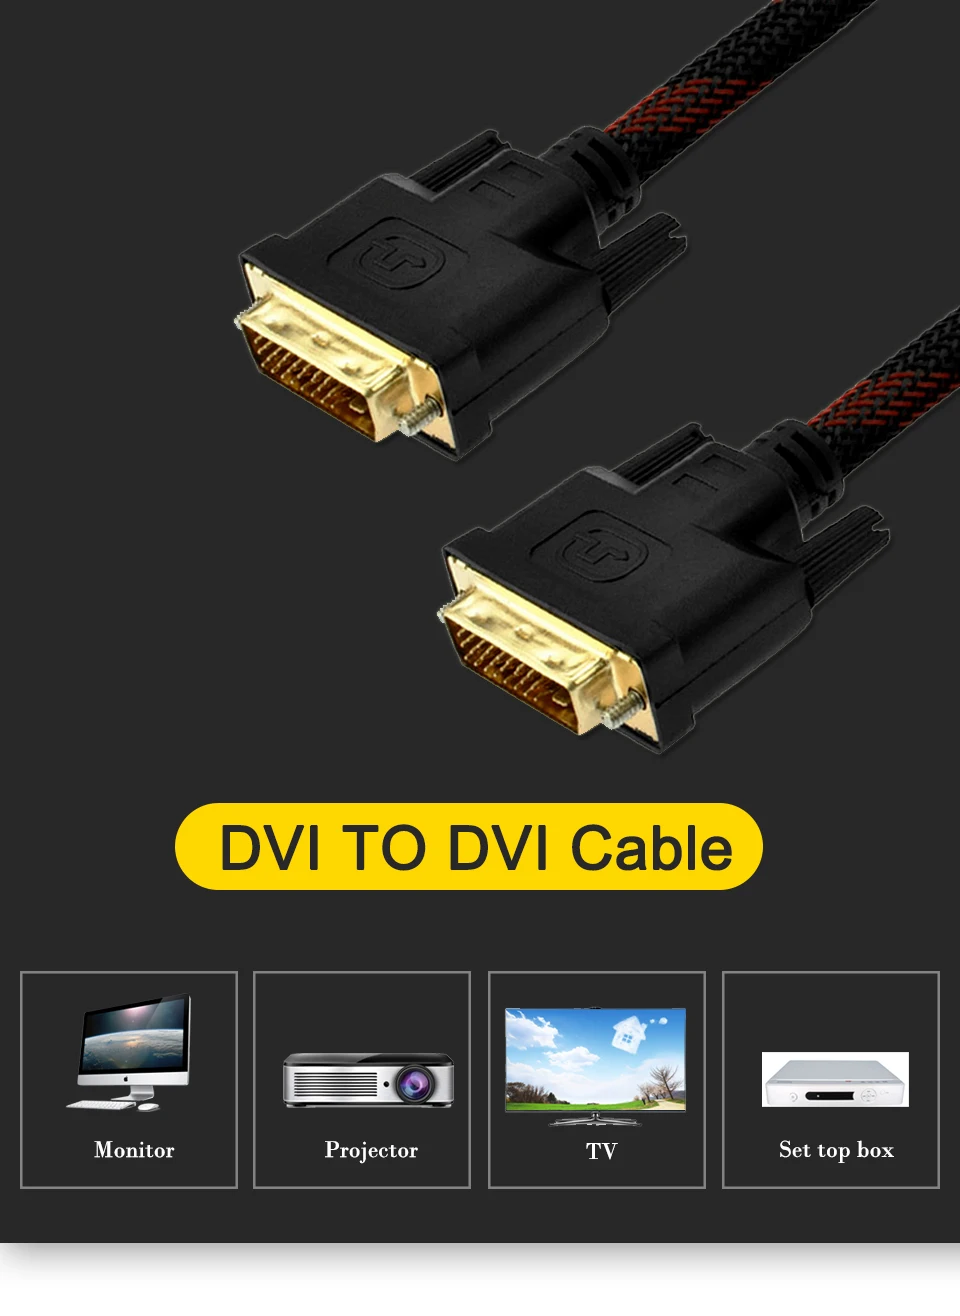 High Speed DVI Cable 1.5M dvi Line Male-Male 24+1 cable 1080p DVI to DVI Cable Adapter For HDTV XBOX Computer Projector (1)